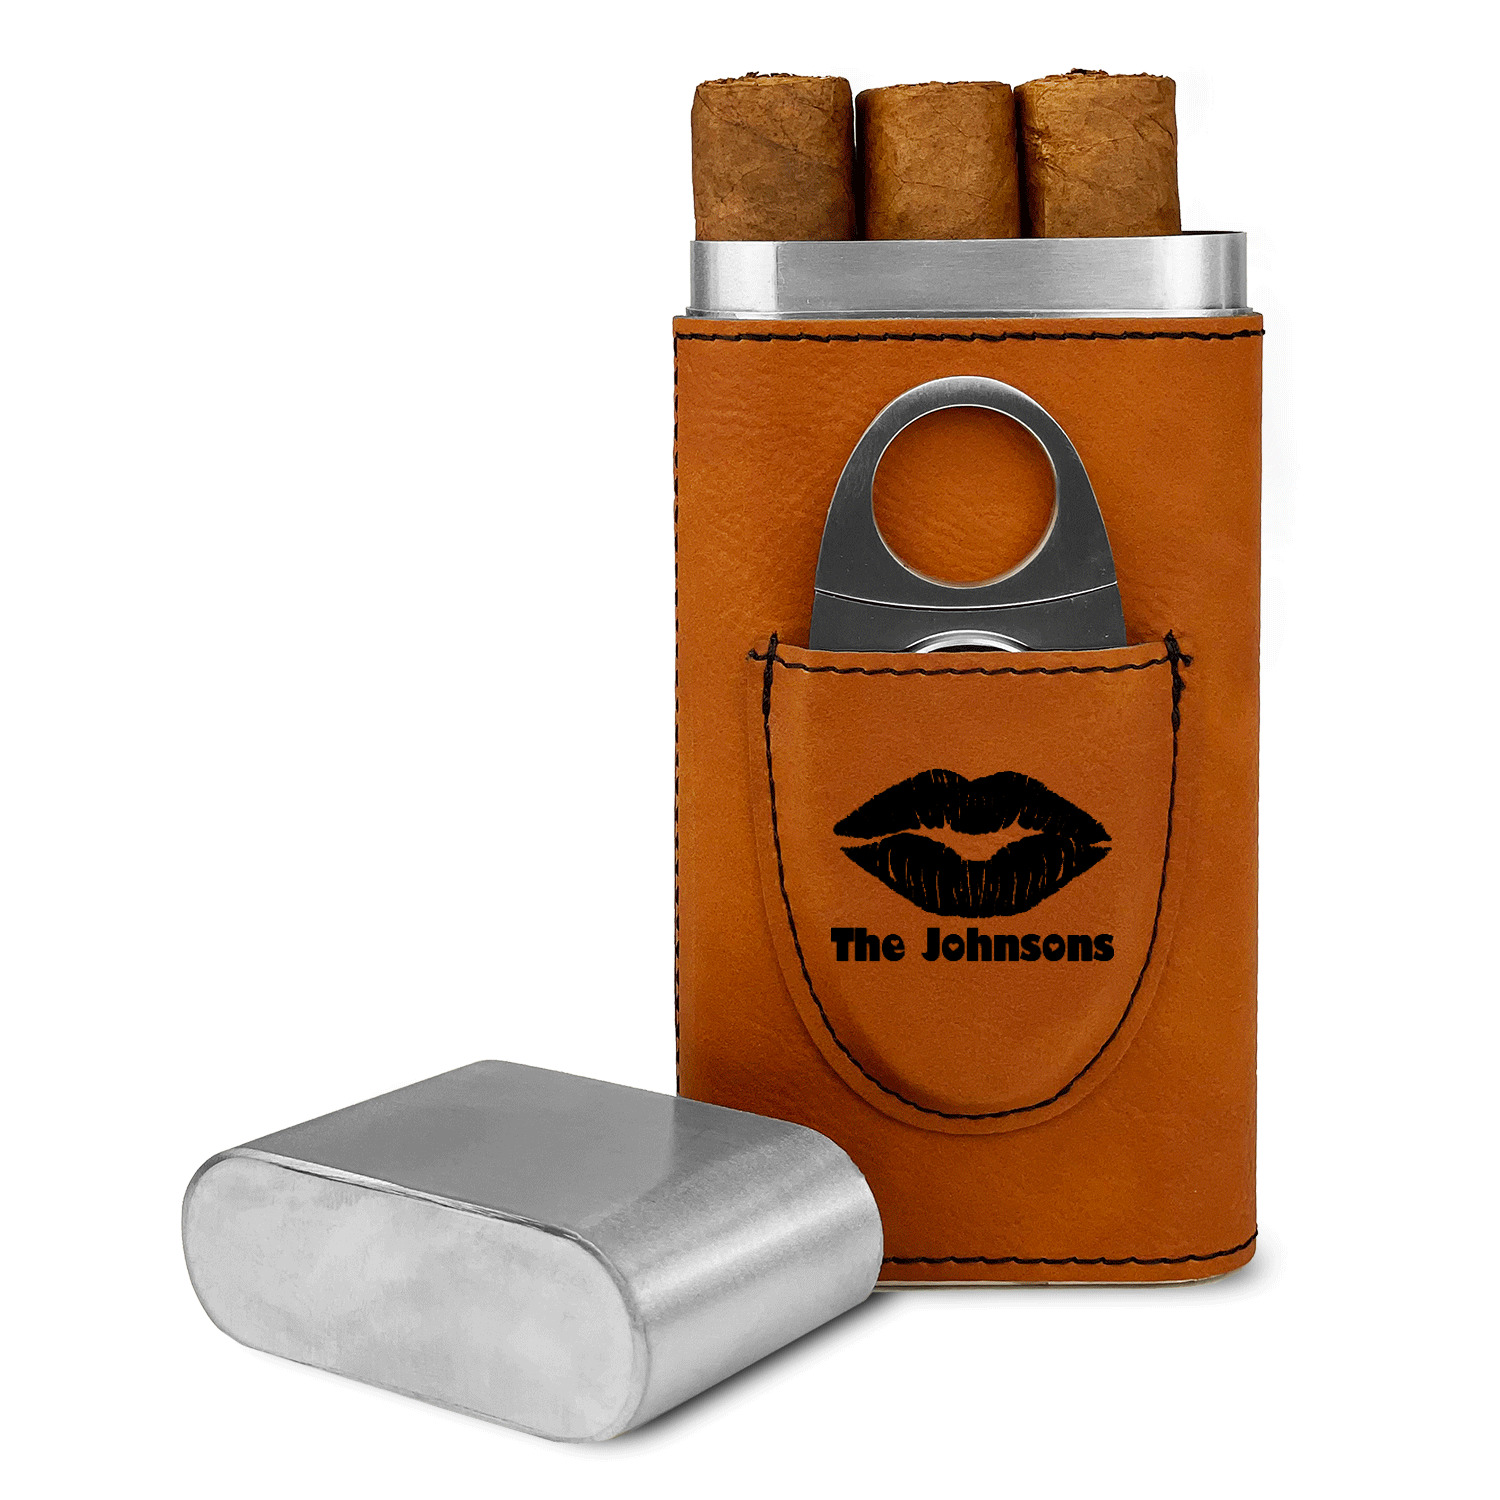 https://www.youcustomizeit.com/common/MAKE/200621/Lips-n-Hearts-Cigar-Case-with-Cutter-MAIN.jpg?lm=1648050415